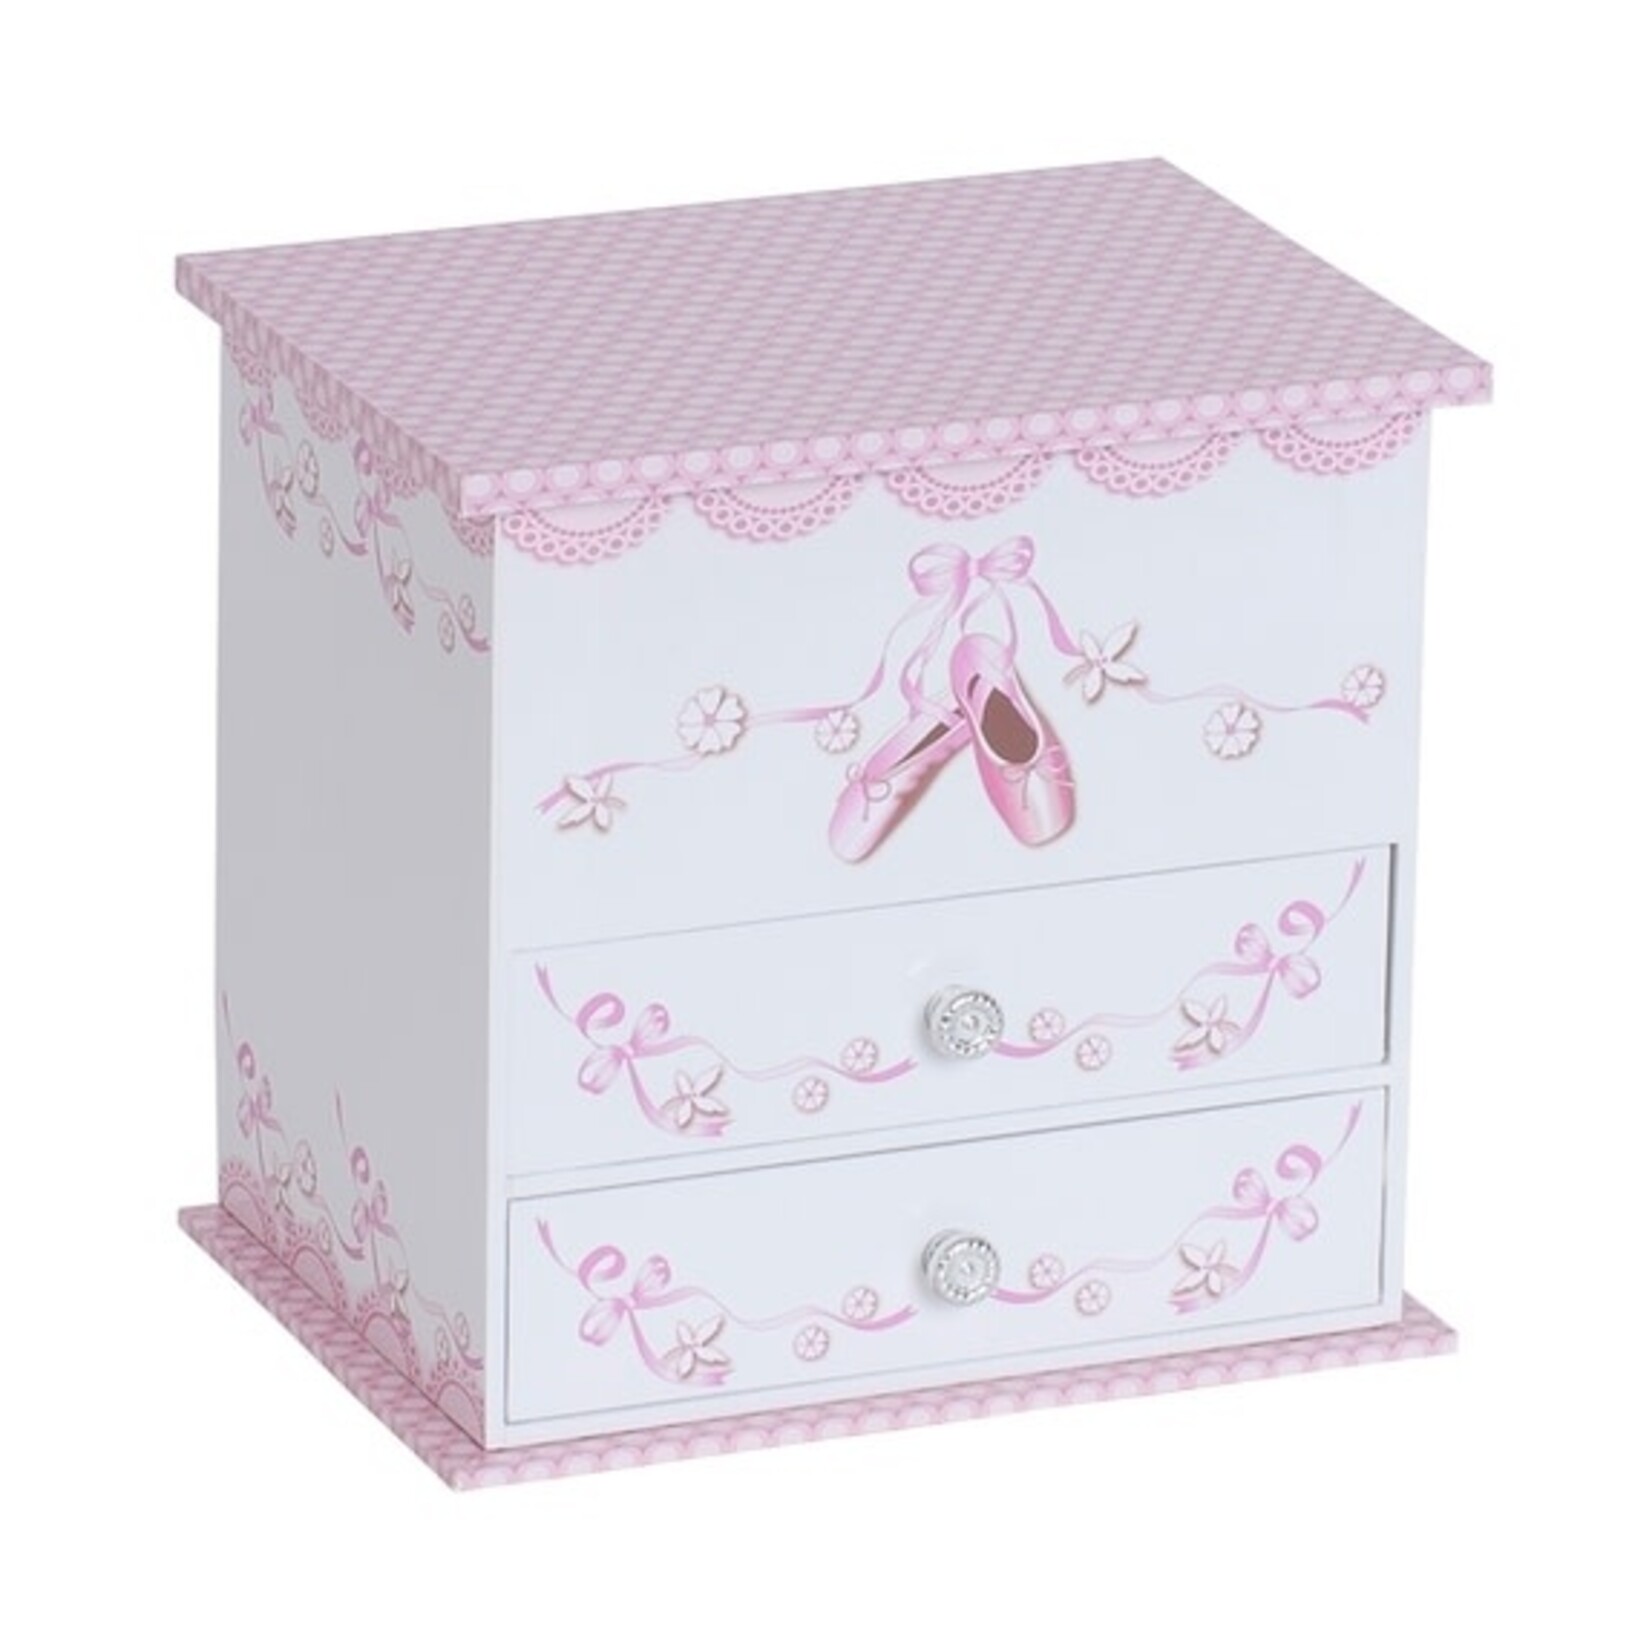 Mele and Co Mele and Co Angel Girls Ballerina Music Jewelry Box Waltz of the Flowers